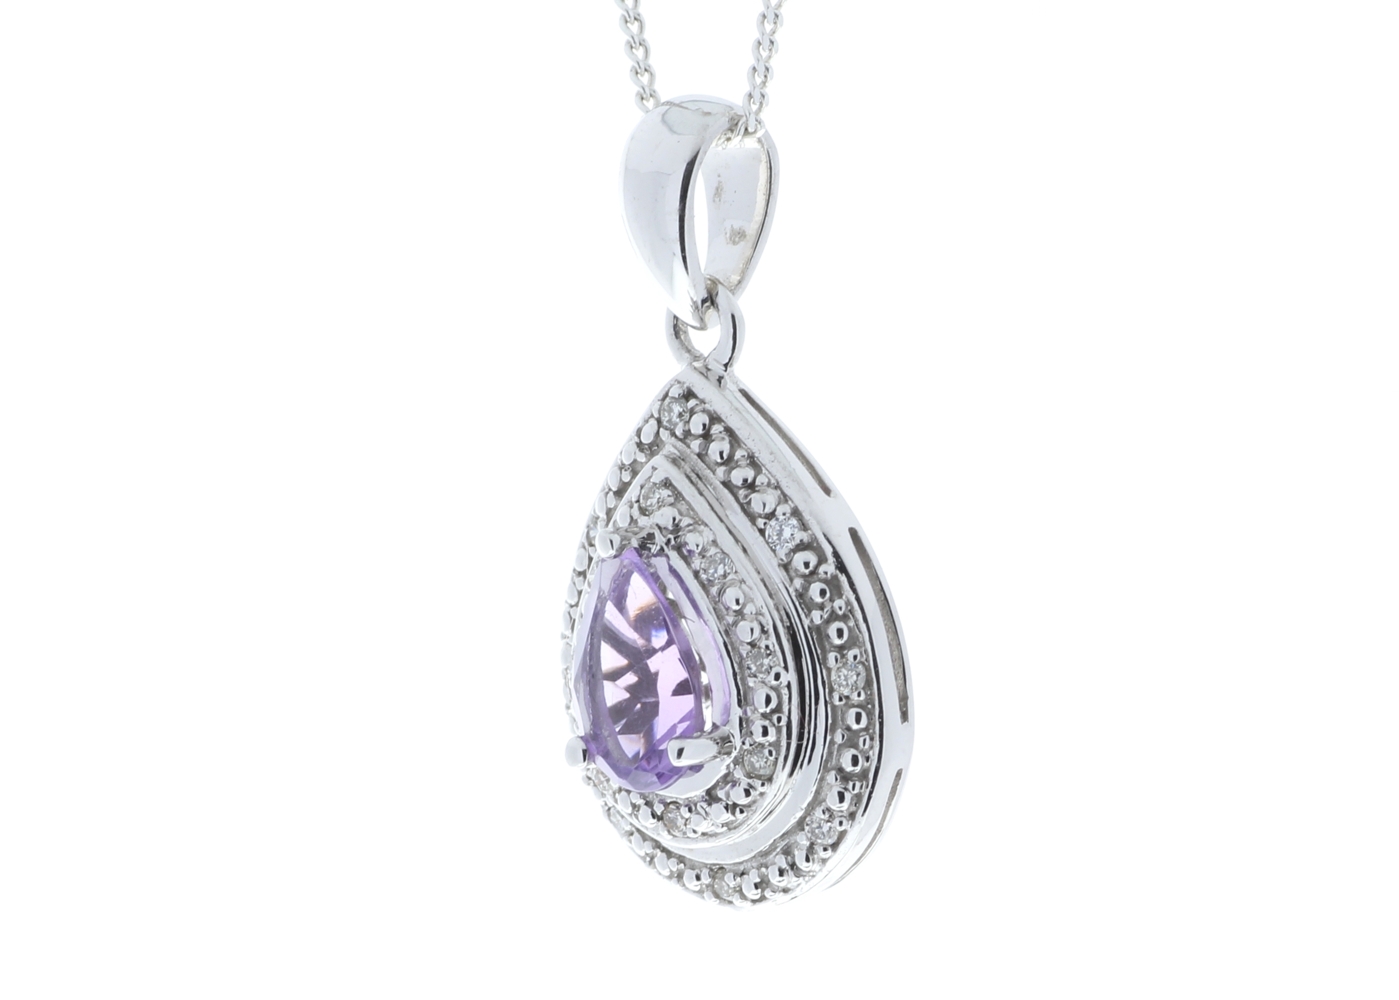 9ct White Gold Amethyst Pear Shaped Cluster Diamond Pendant - Image 4 of 4